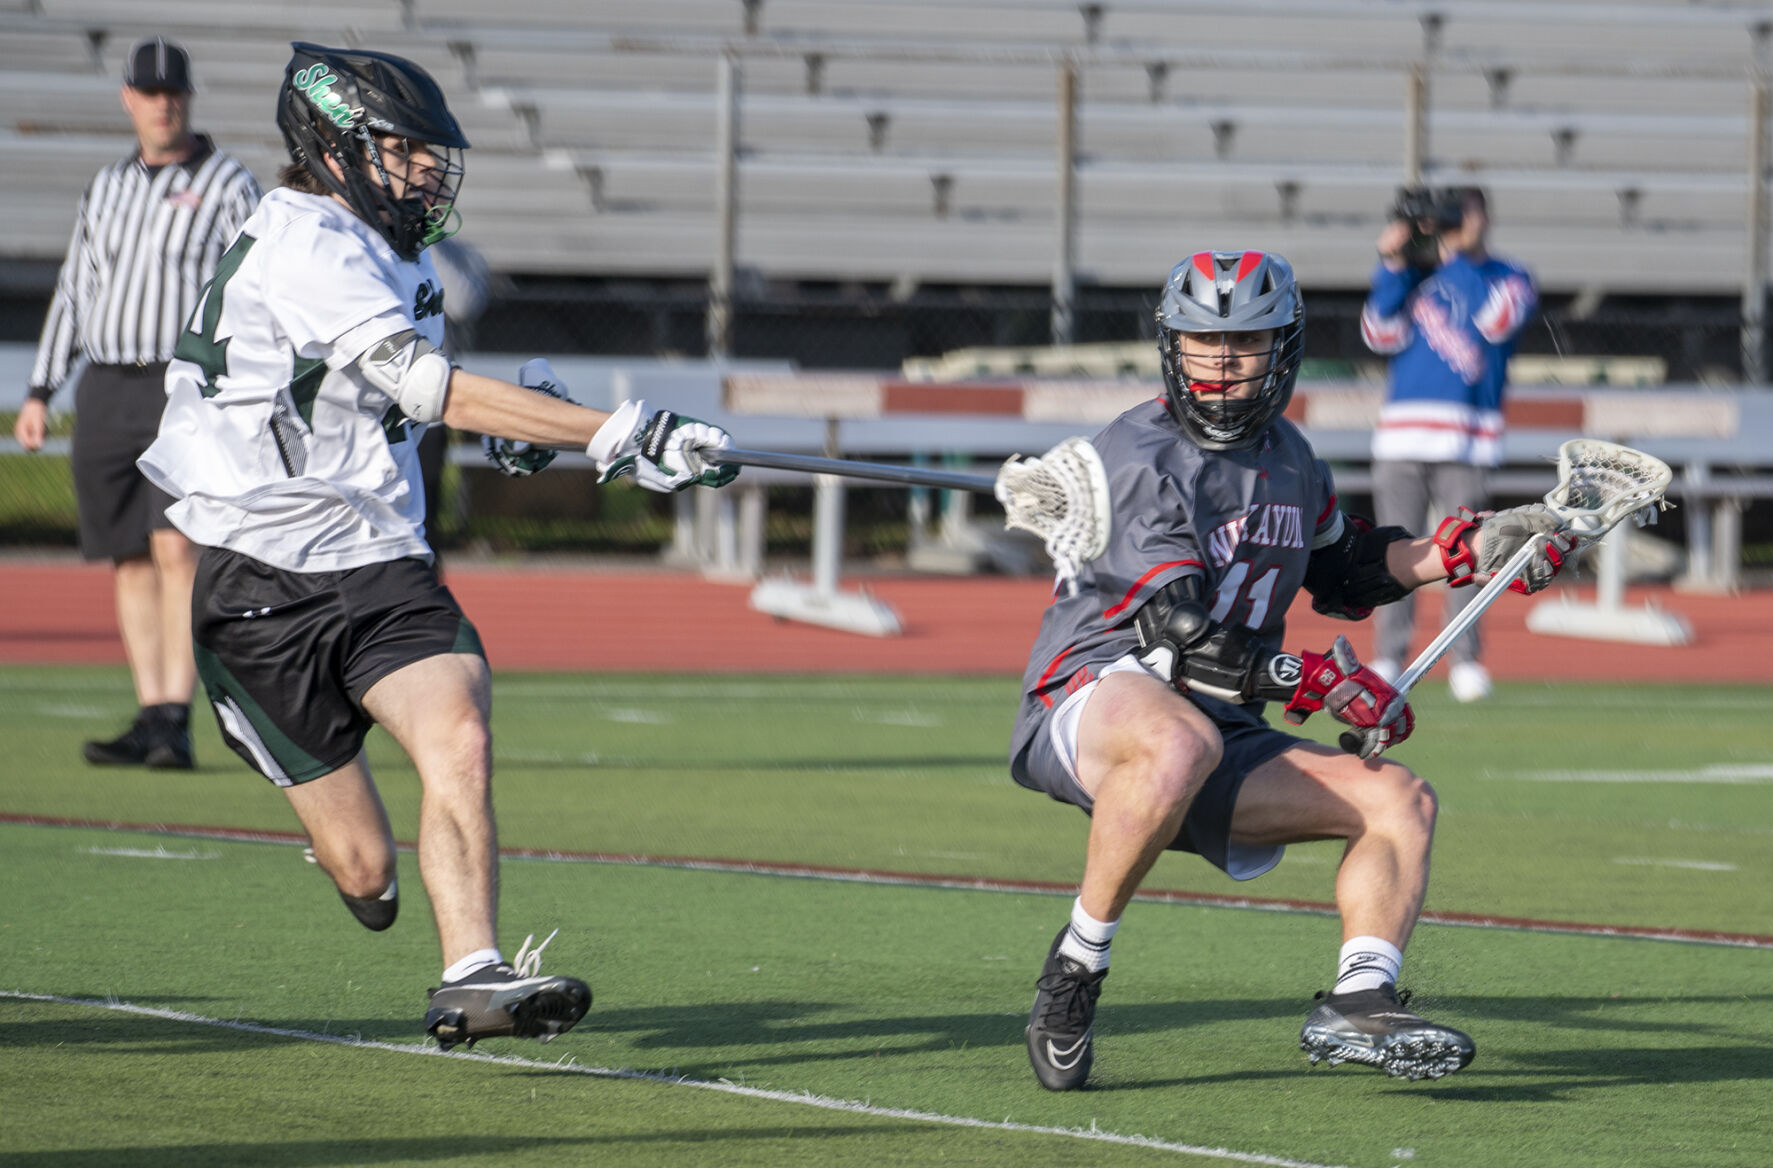 Niskayuna Boys’ Lacrosse Eyes Top Seed in Section 2 Class B with Strong Performance and Key Players